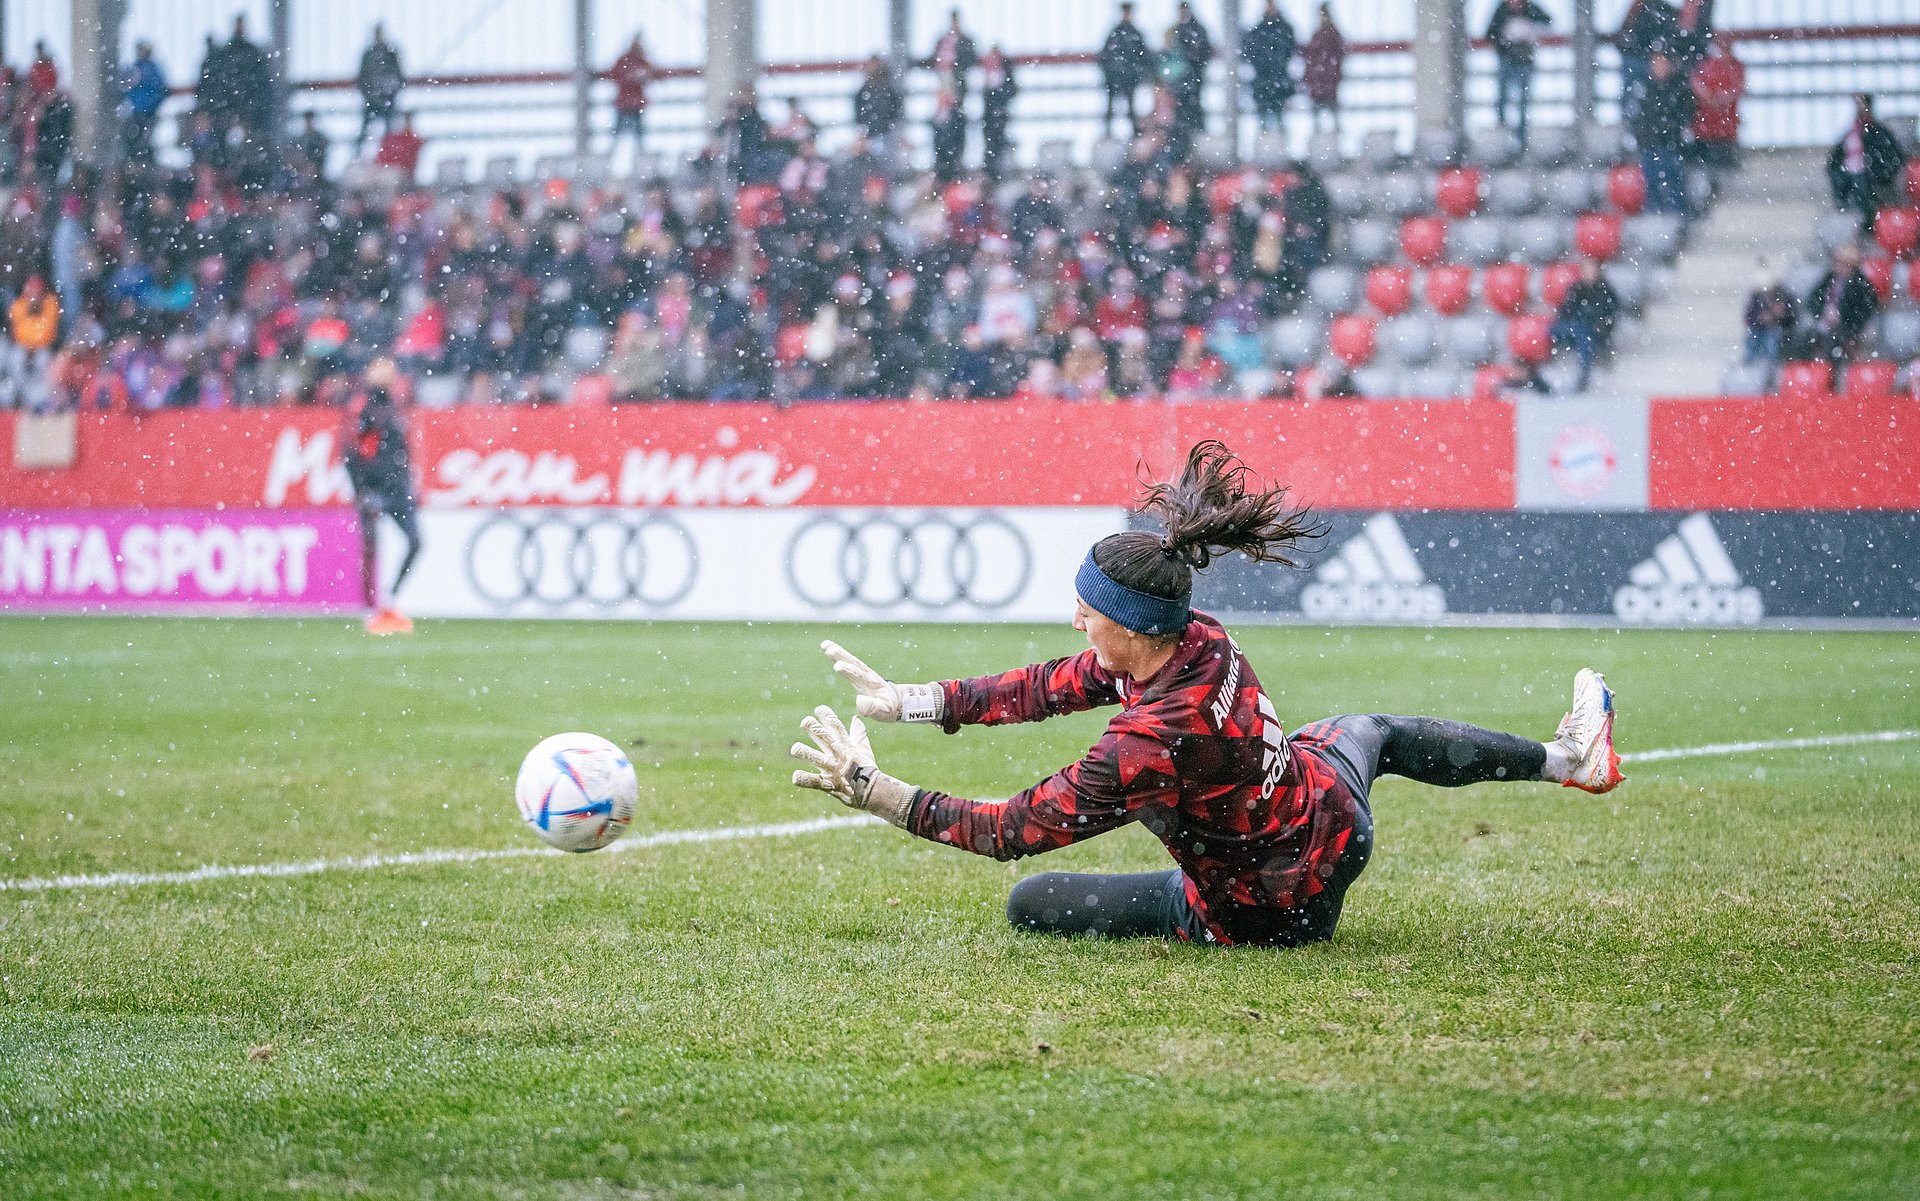 Goalkeeper Maria Luisa Grohs from FC Bayern München in action. 